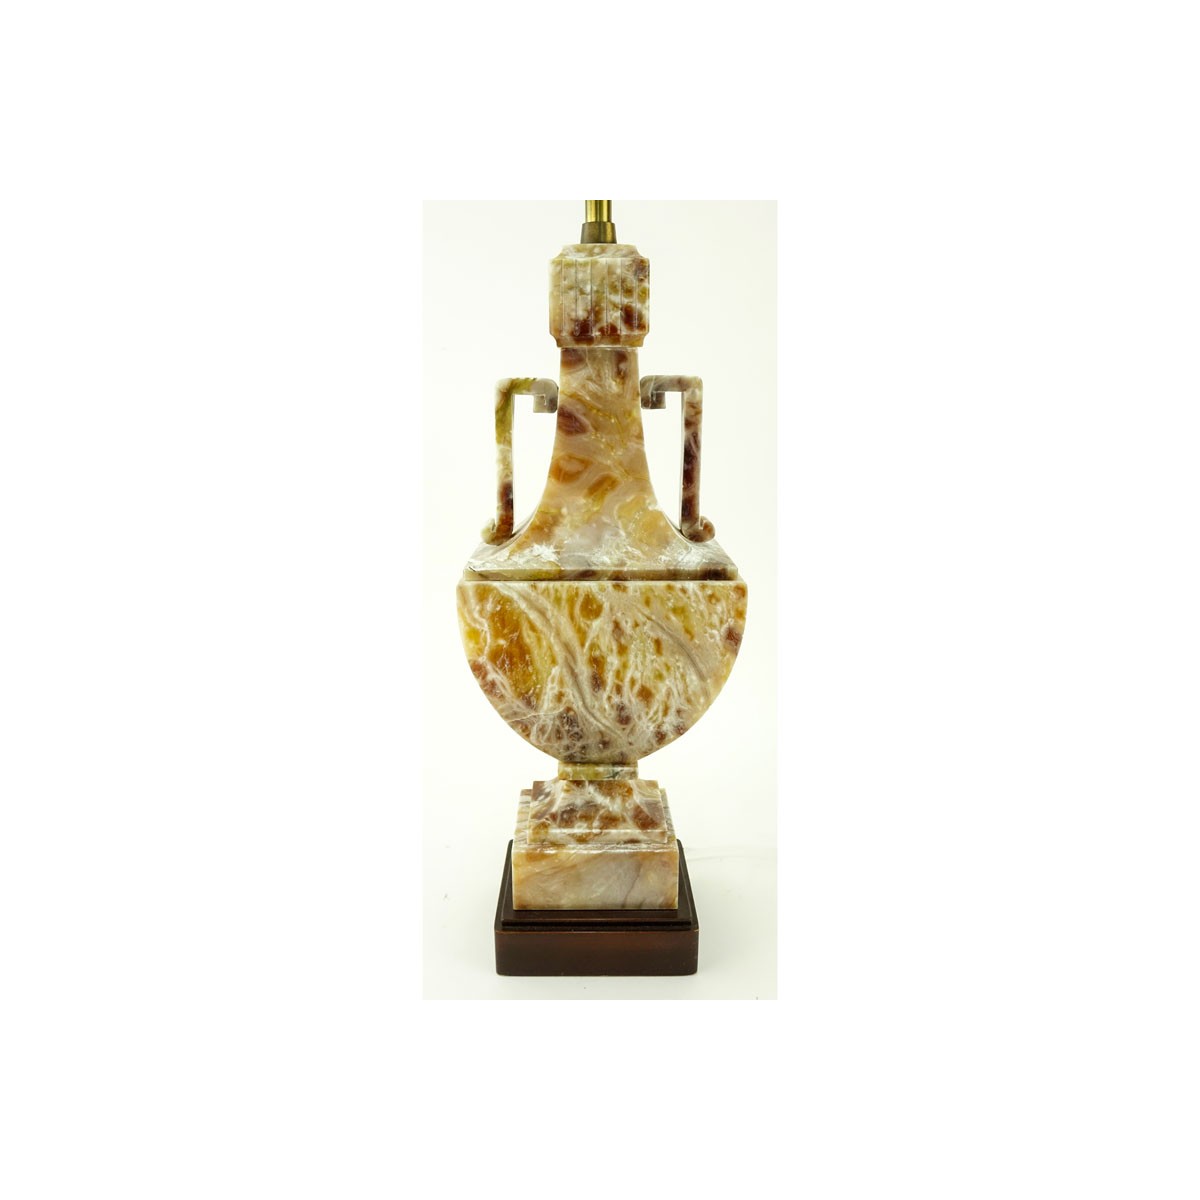 Mabro Lamp Co. Carved Onyx Chinoiserie Urn Lamp. Minor scuffing.